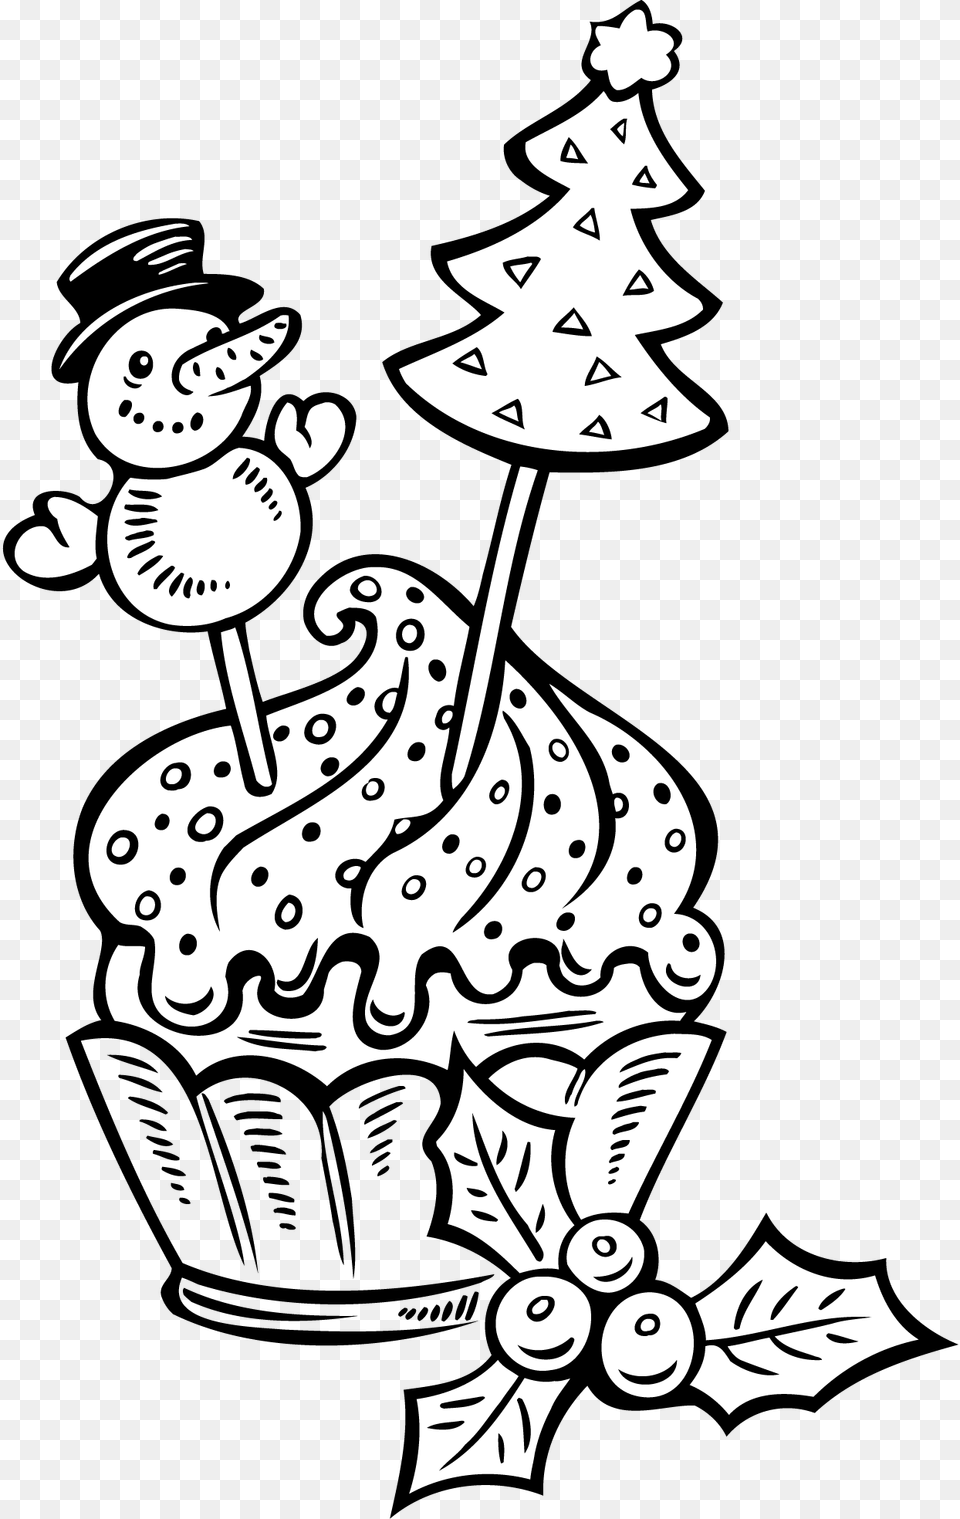 Christmas Cake Coloring, Art, Doodle, Drawing, Christmas Decorations Free Transparent Png